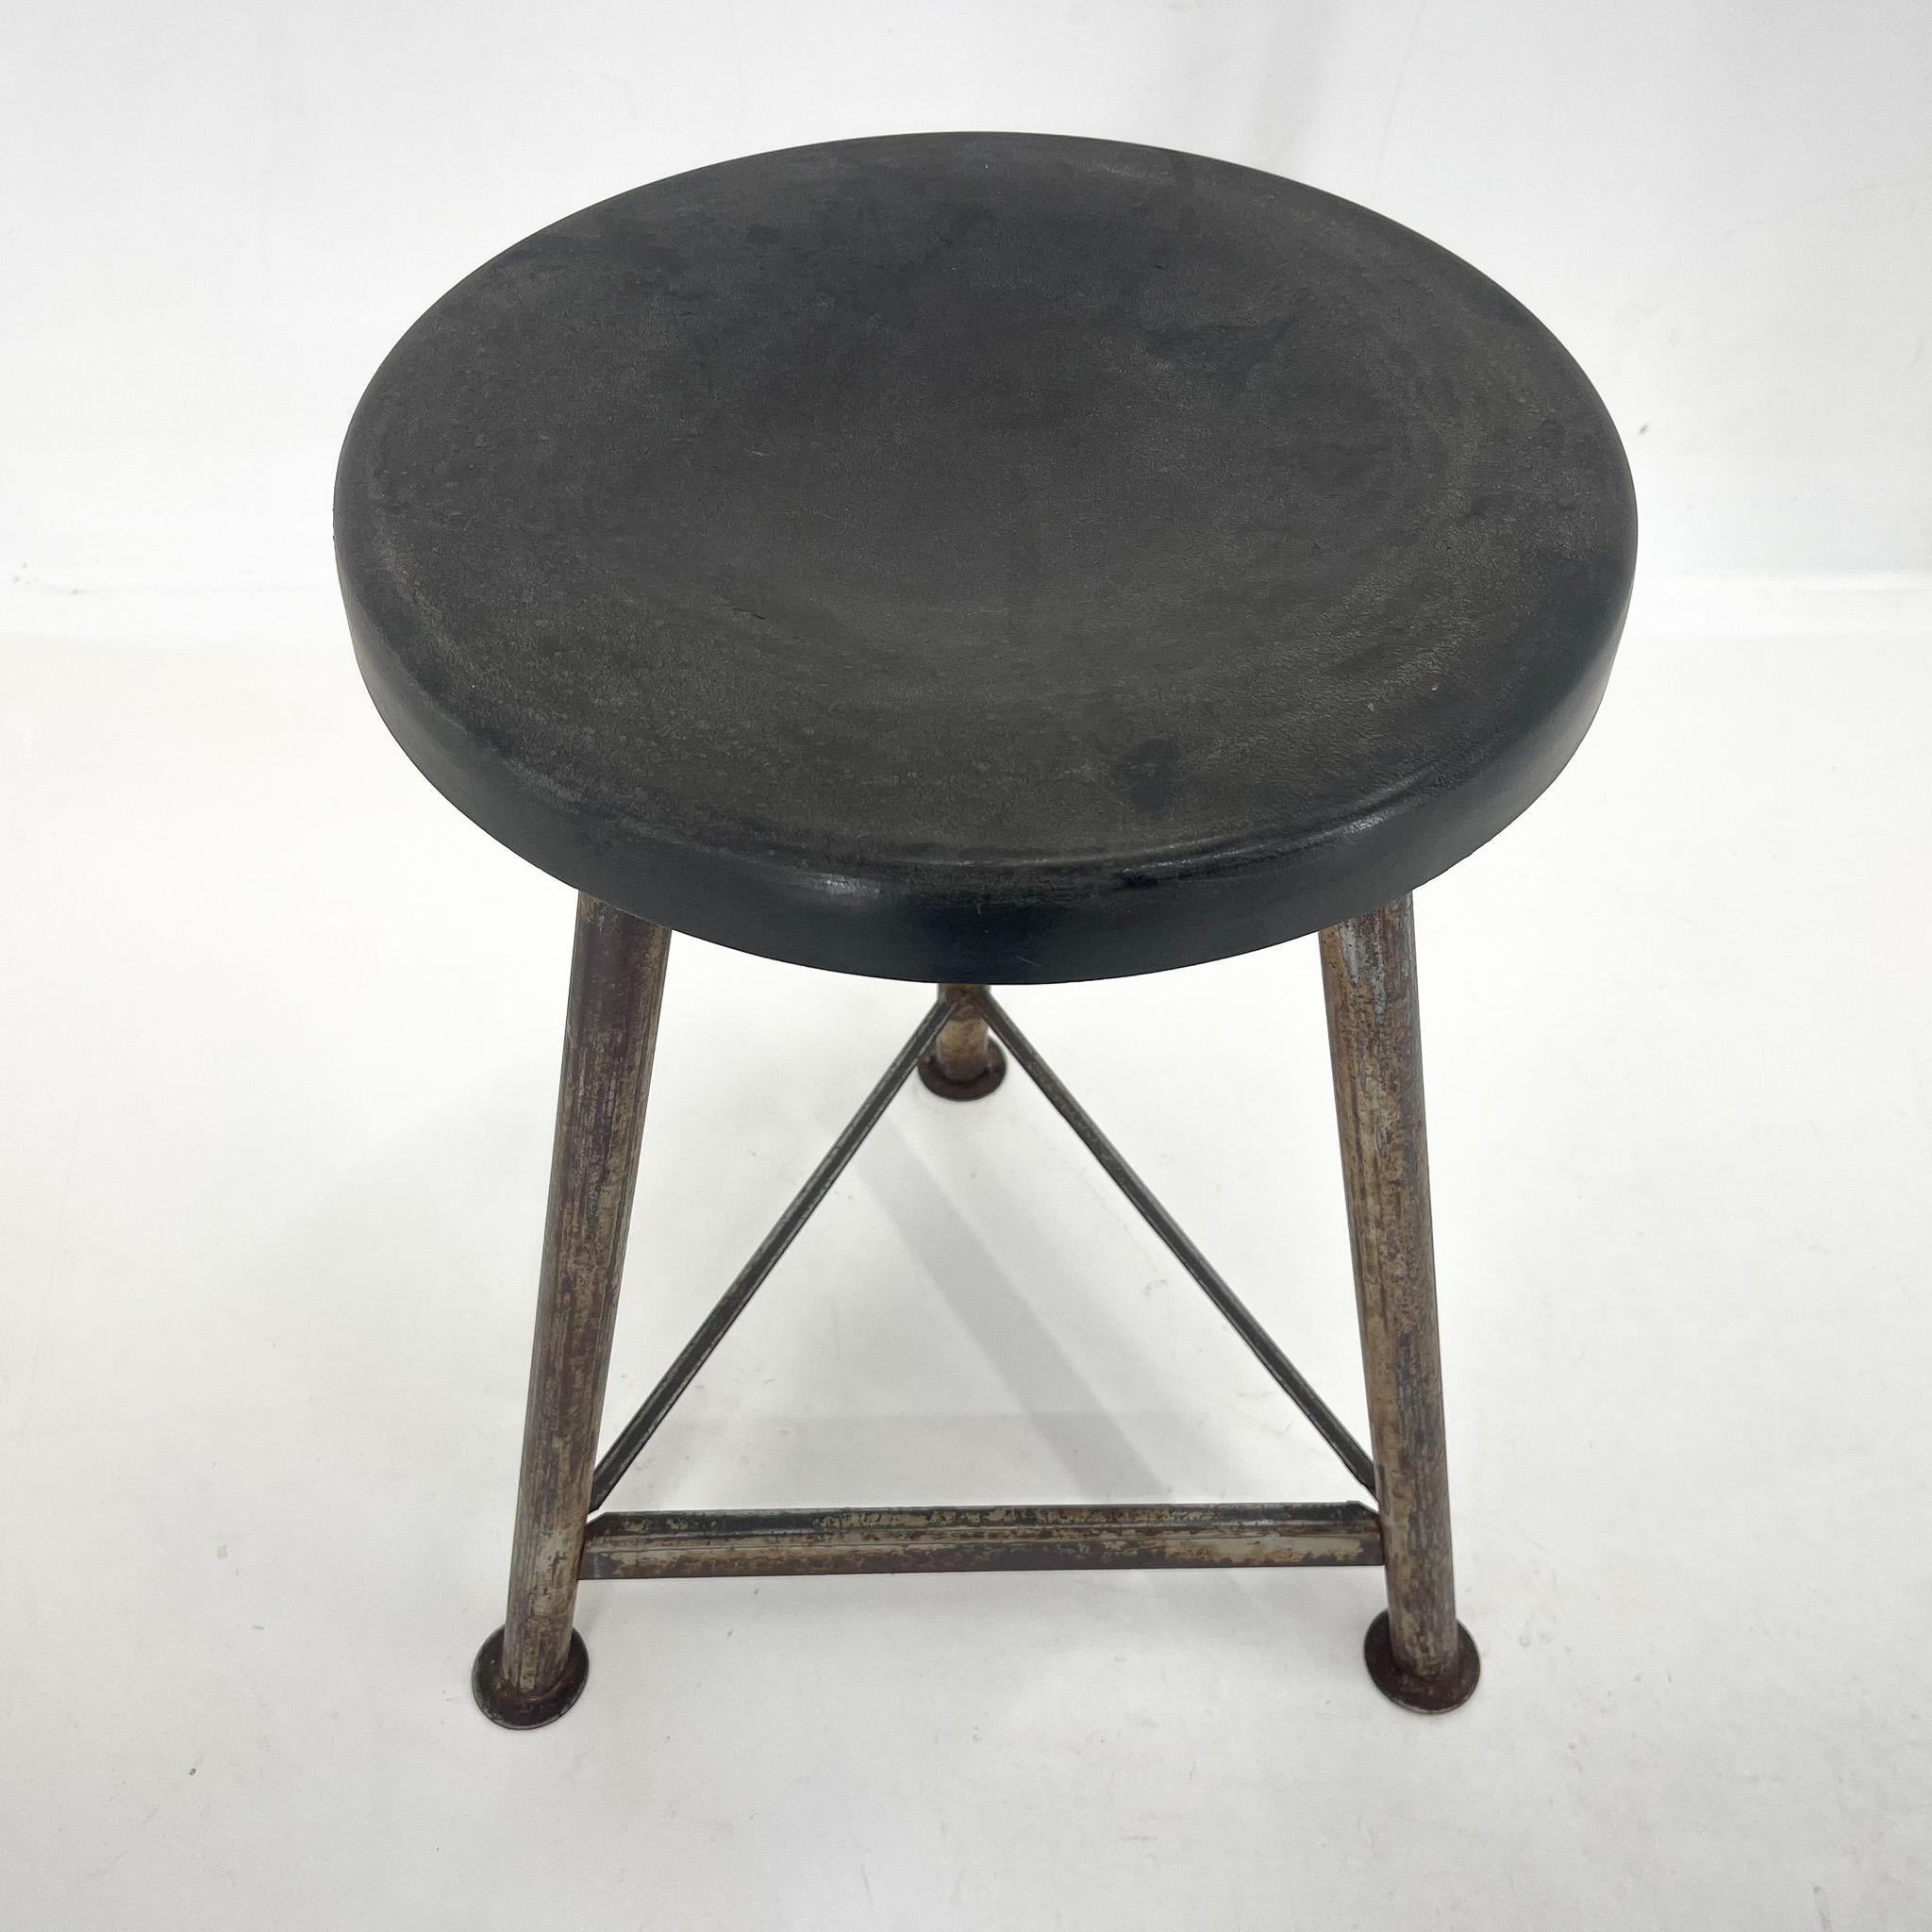 Czech Vintage Industrial Iron Tripod Stool with Original Plastic Seat, 1950s For Sale